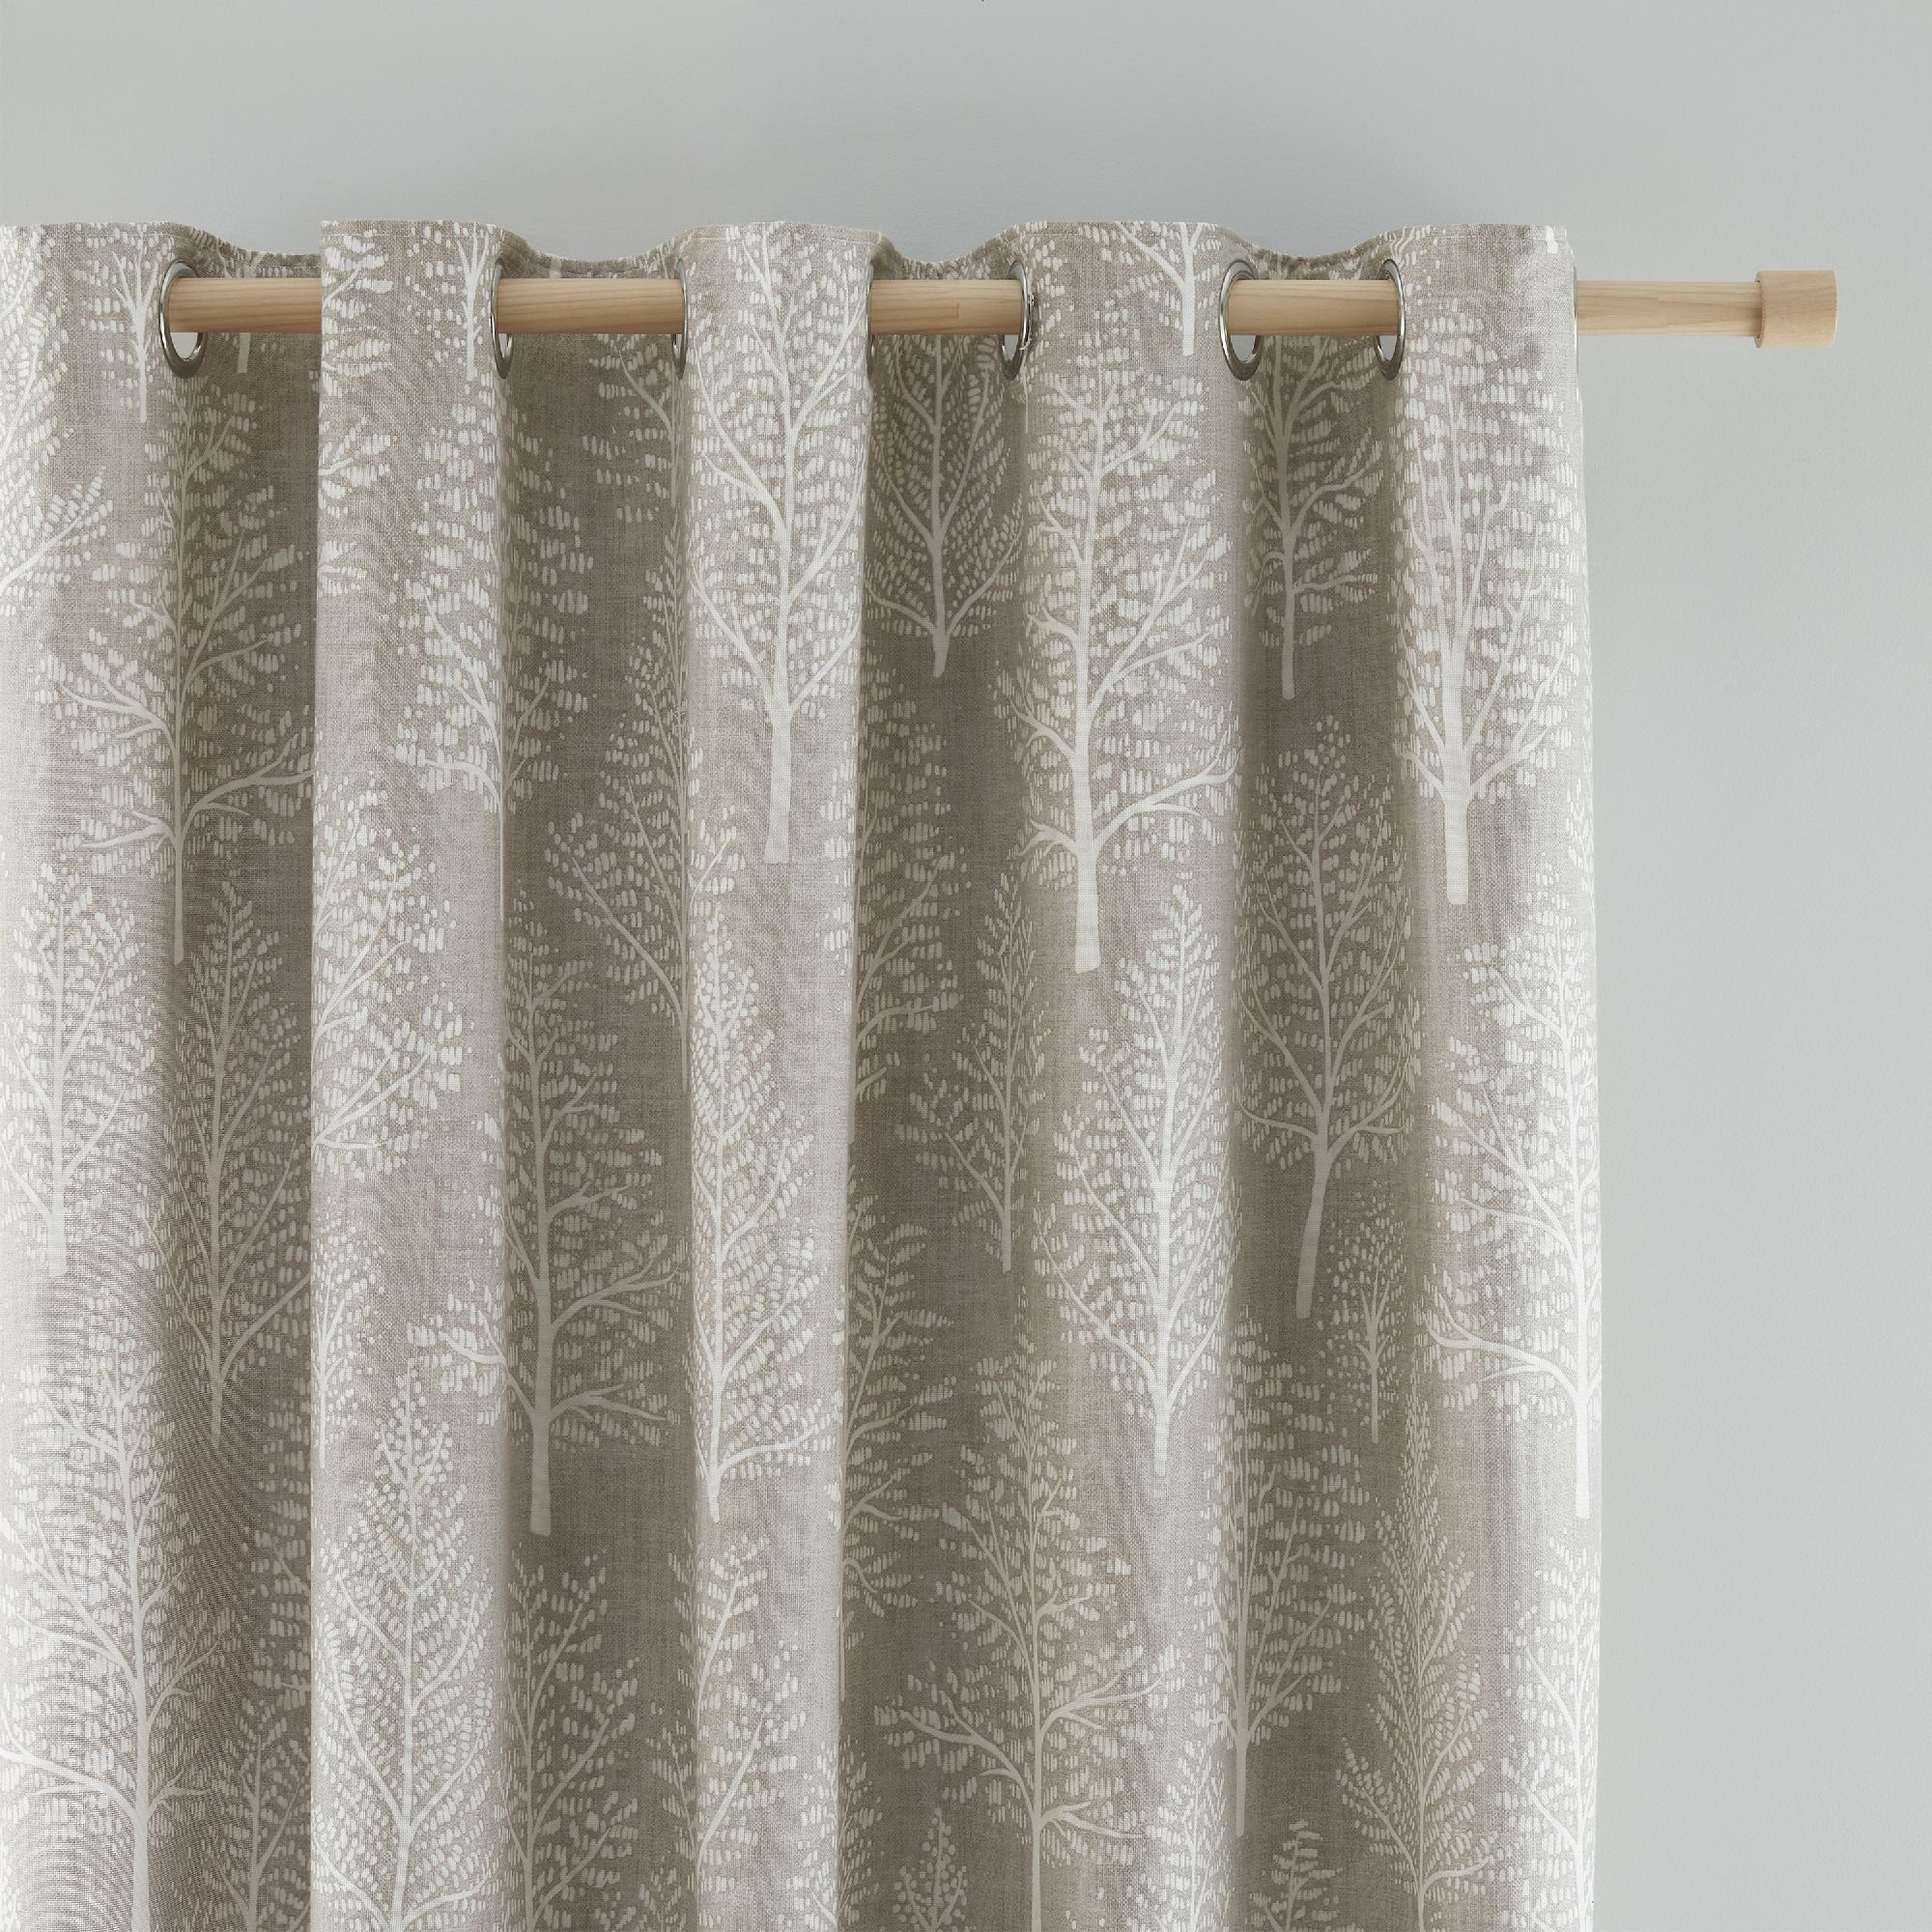 Photos - Curtains & Drapes Catherine Lansfield Alder Trees Eyelet Curtains Natural 